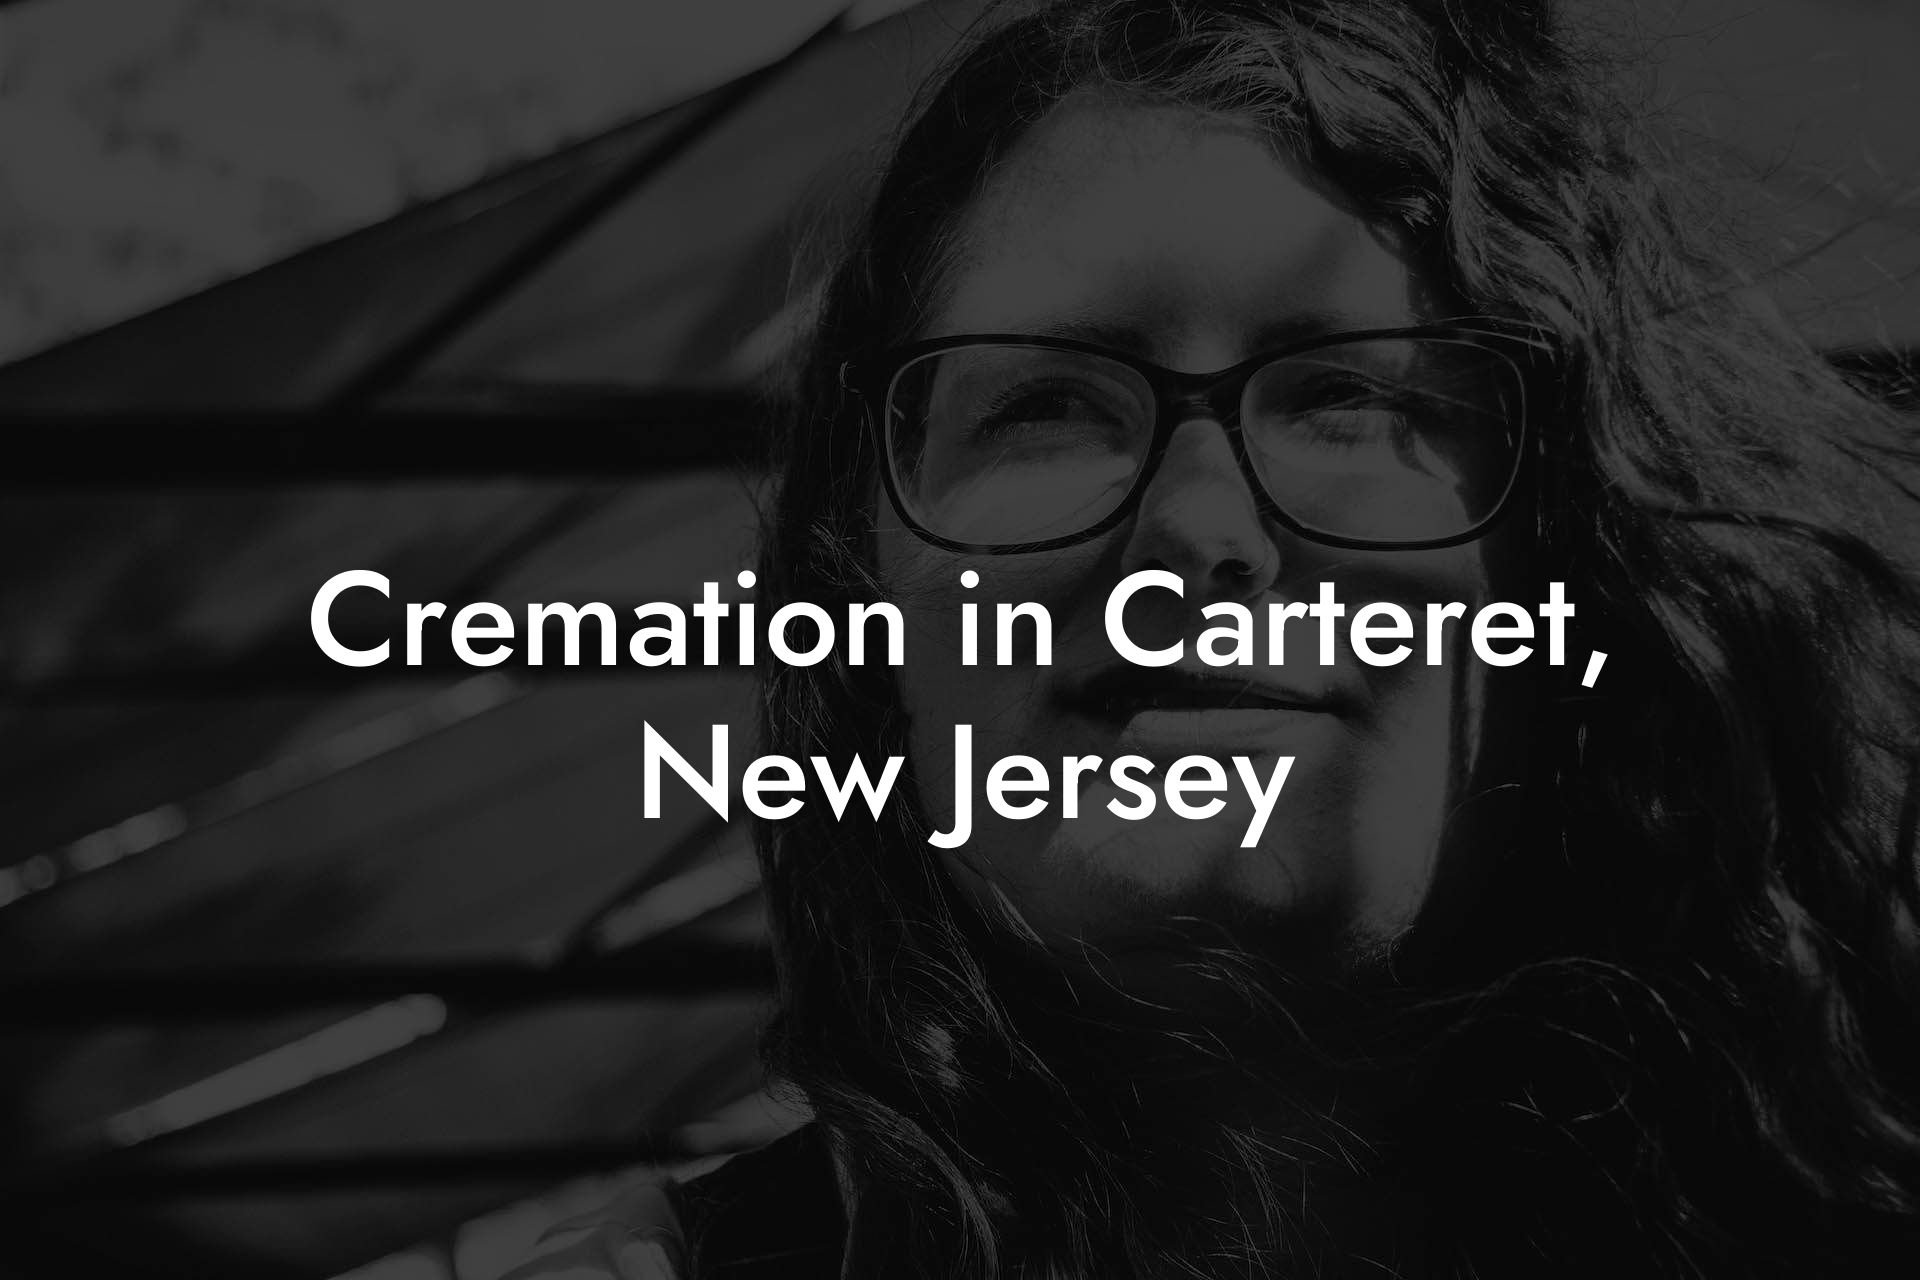 Cremation in Carteret, New Jersey